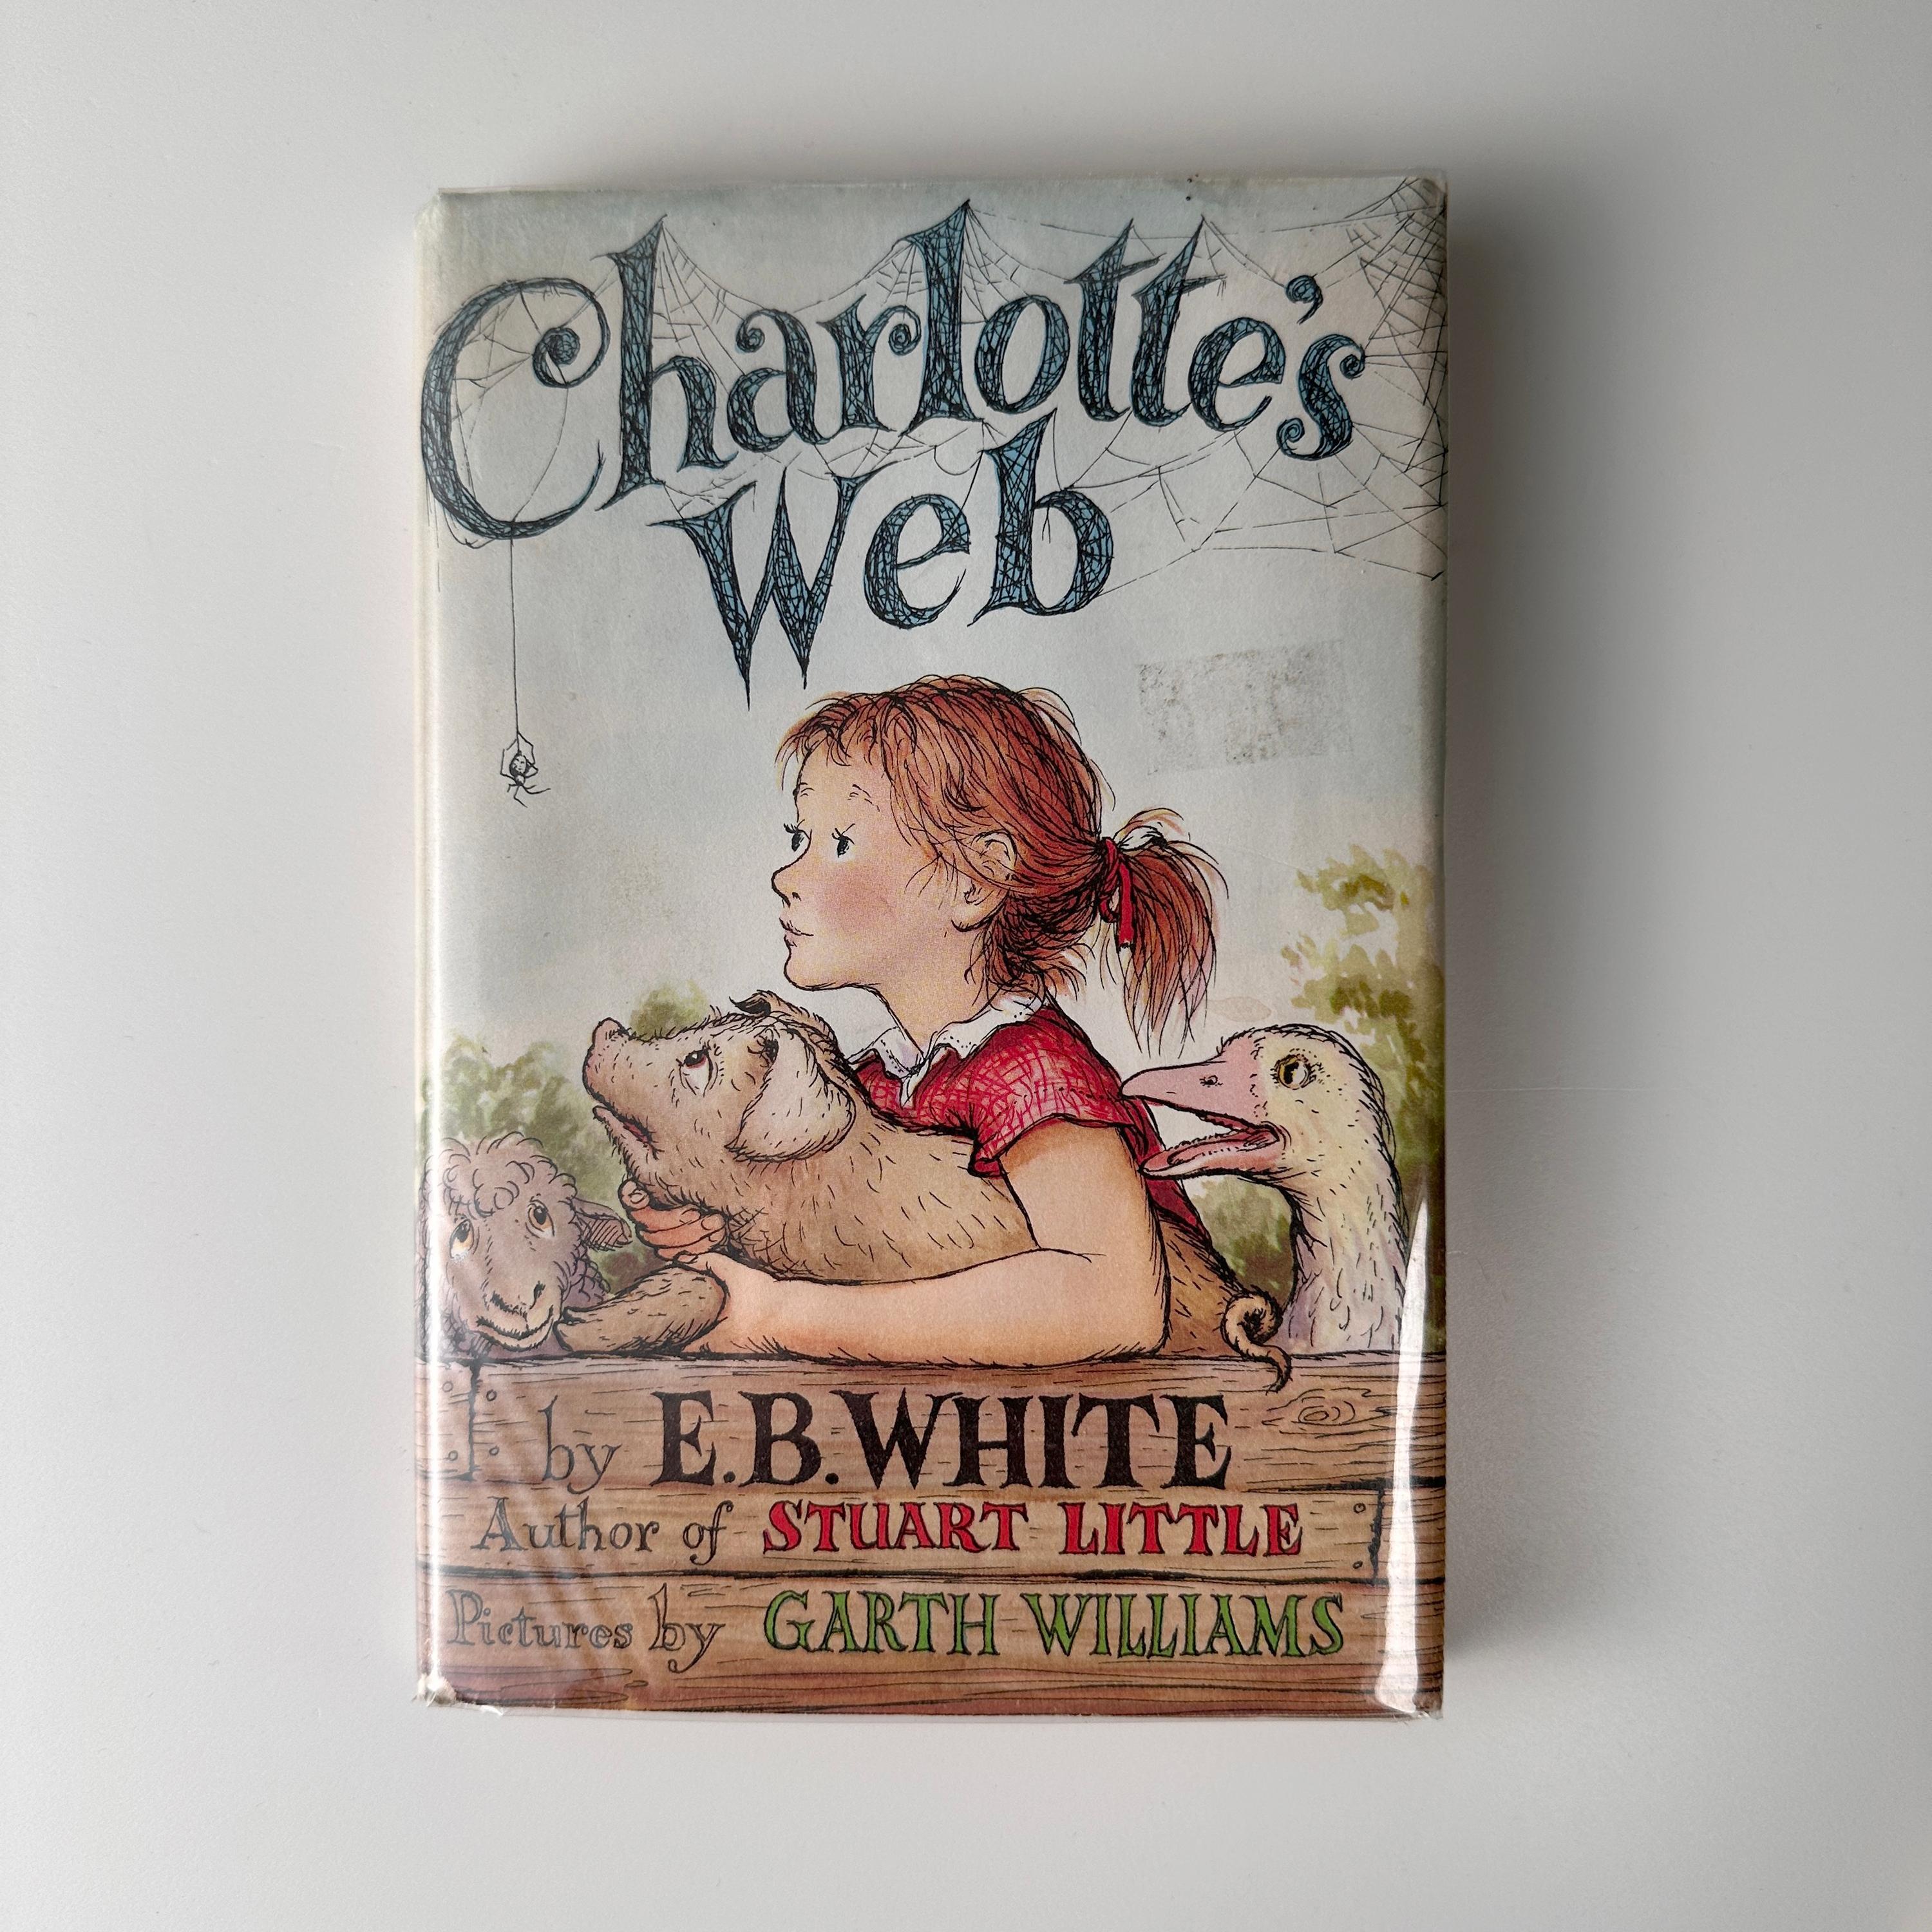 This exceedingly rare hardcover first edition, first printing of E.B. White's timeless classic, 